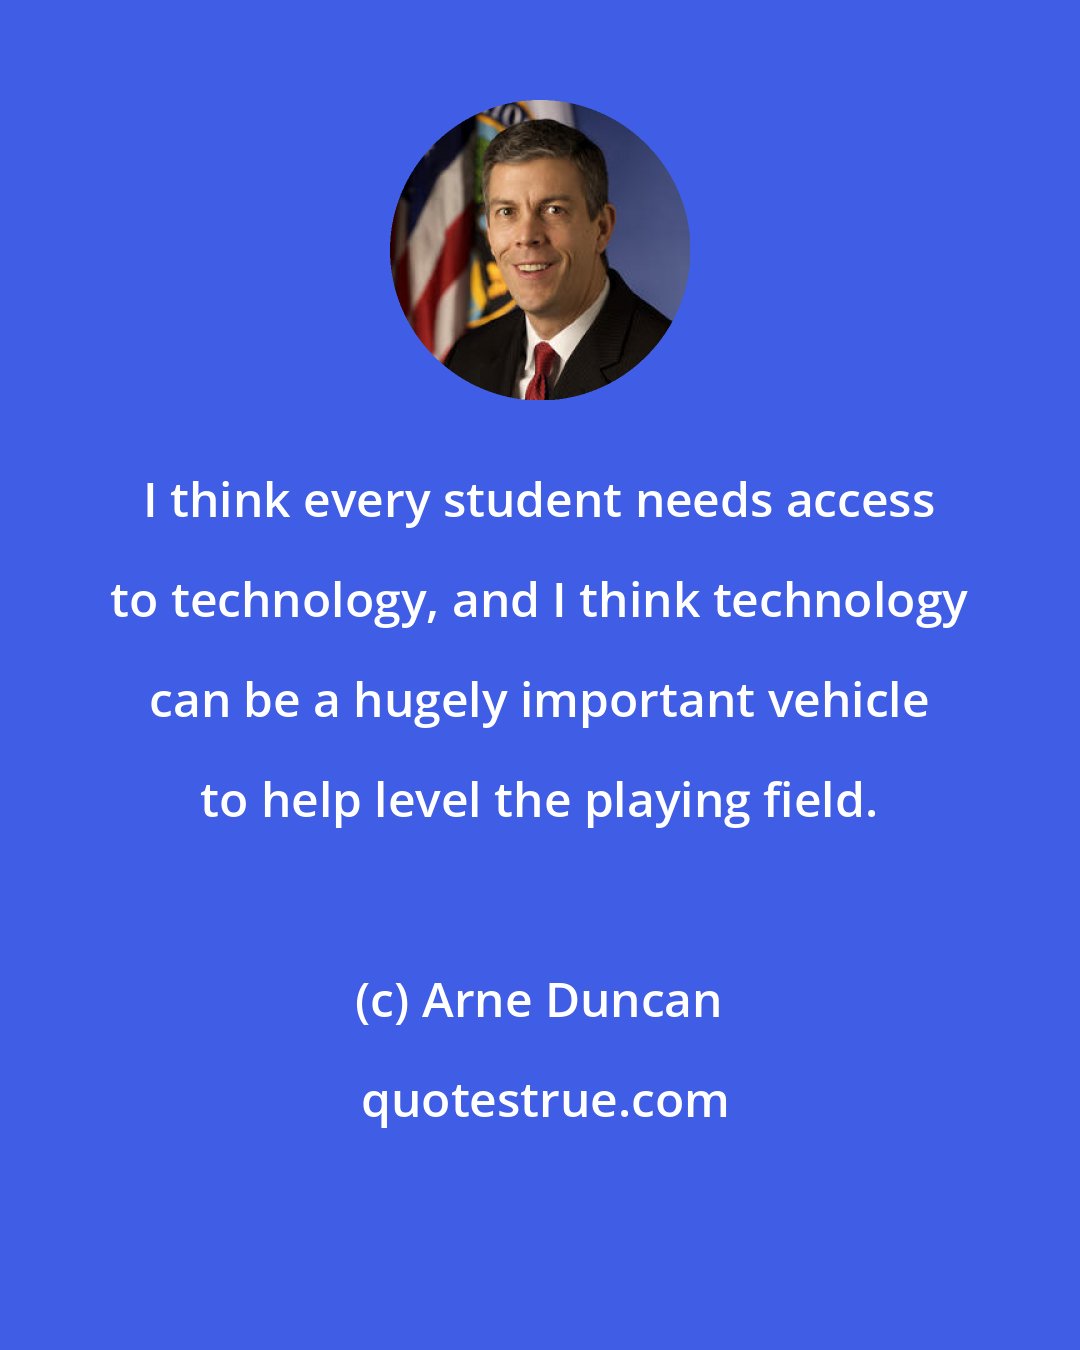 Arne Duncan: I think every student needs access to technology, and I think technology can be a hugely important vehicle to help level the playing field.